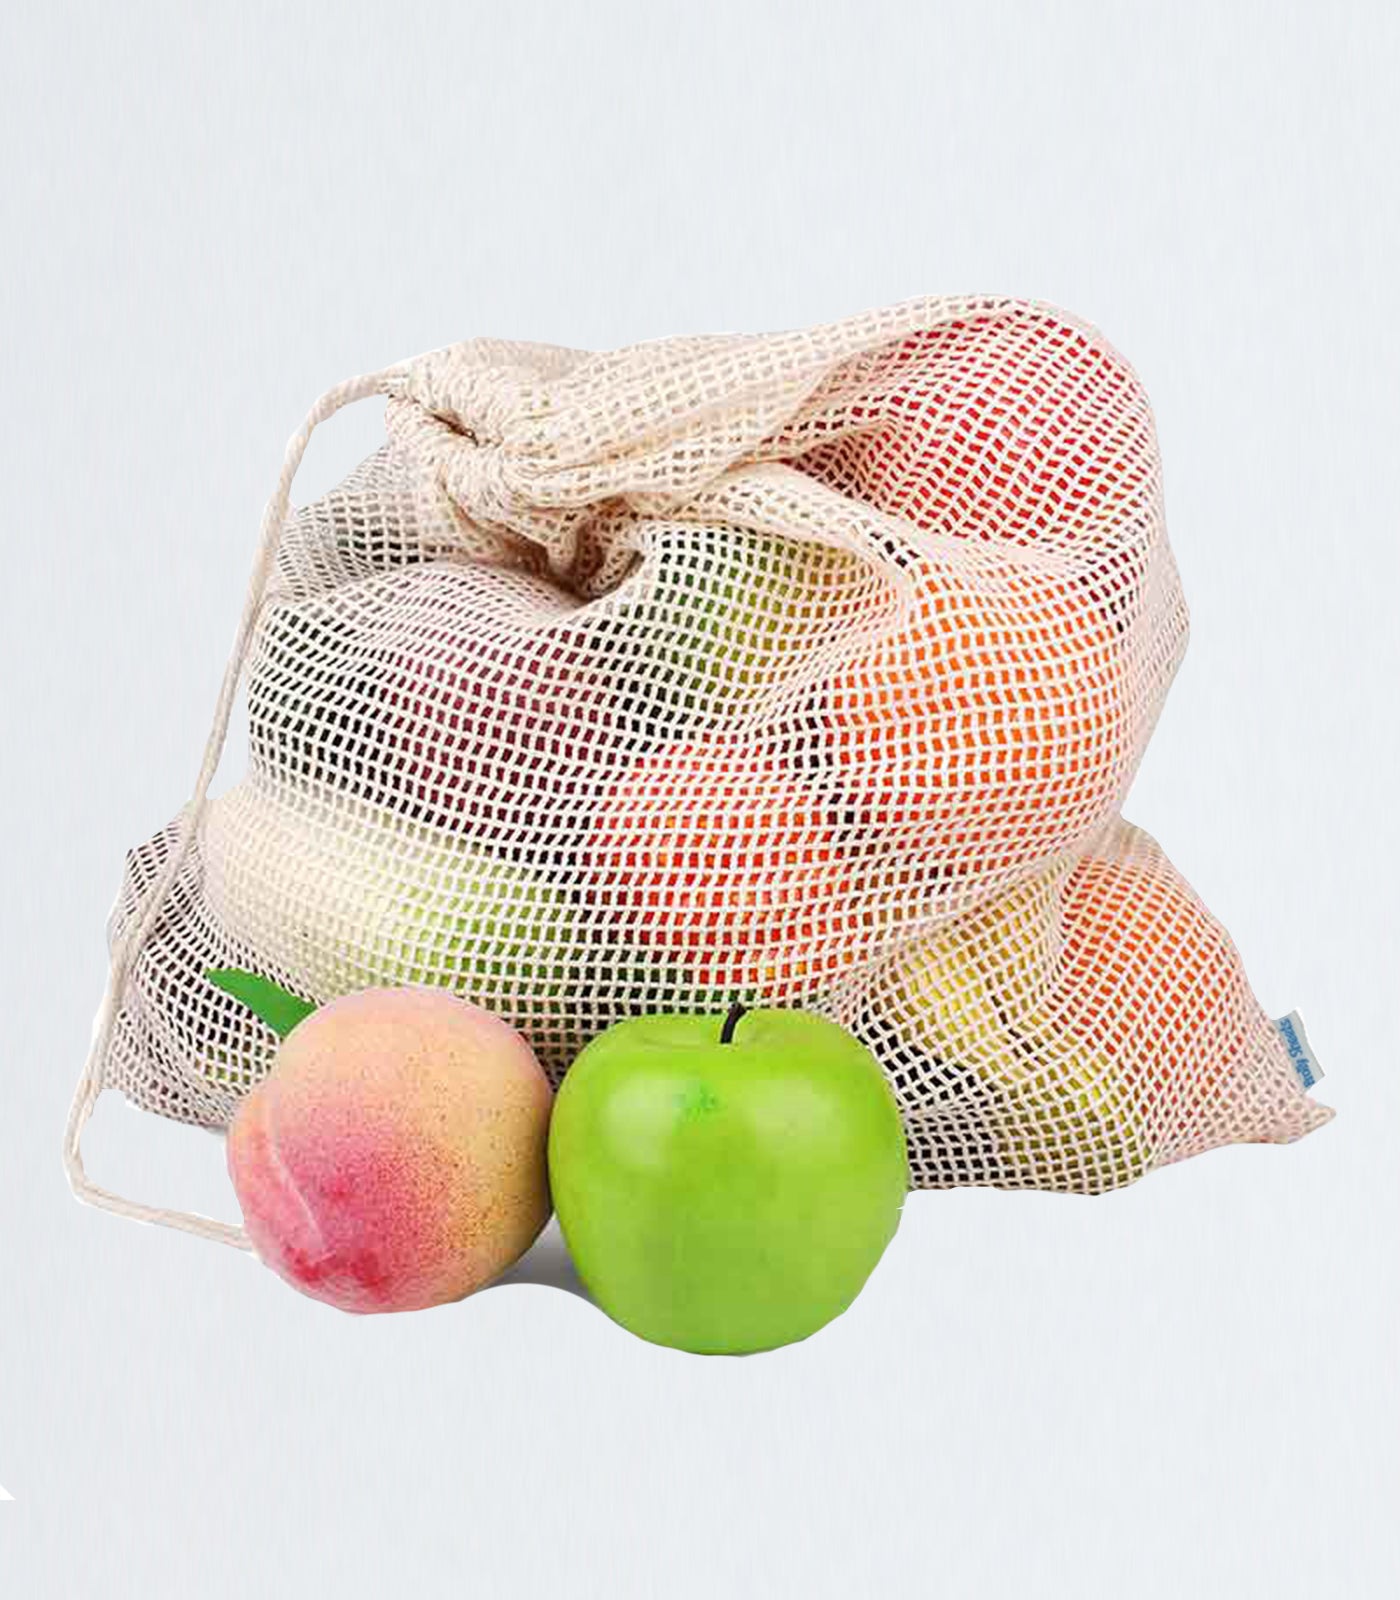 Cotton Produce Bags - 3 Pack - Brolly Sheets AU